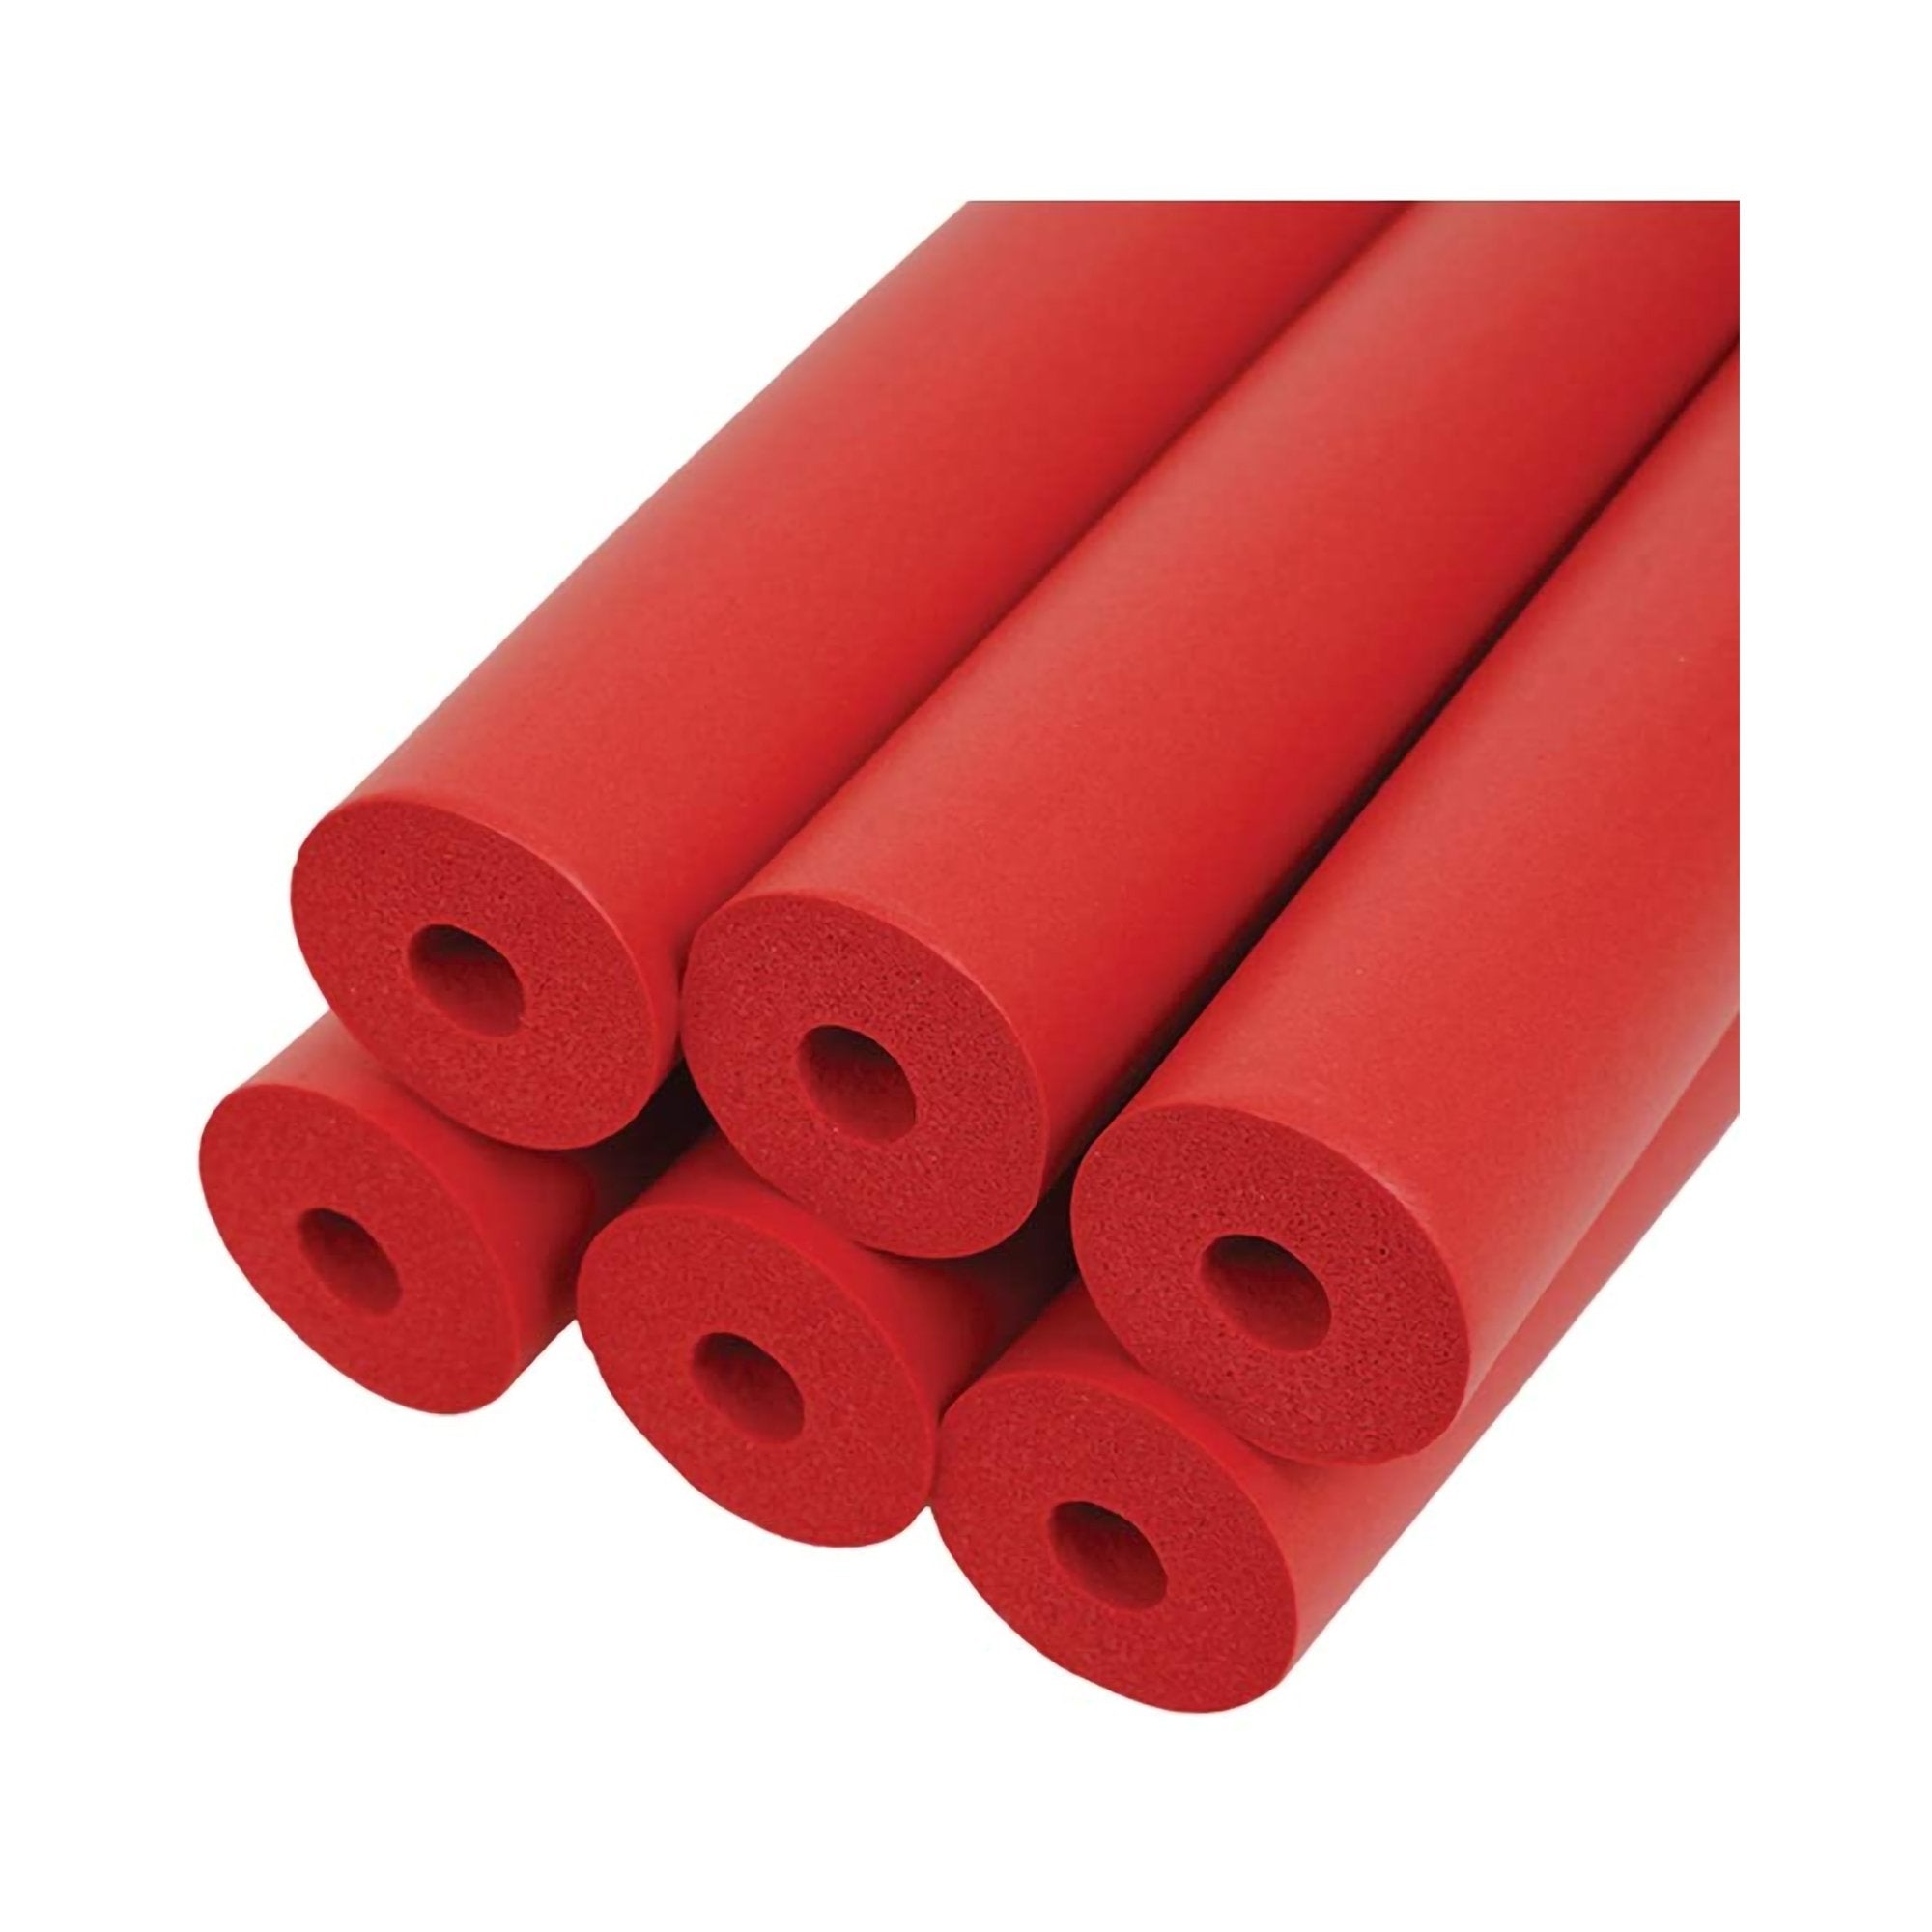 Closed Cell Foam Tubing 3/8 X 1-1/8 Inch, 3/8 Inch, Red